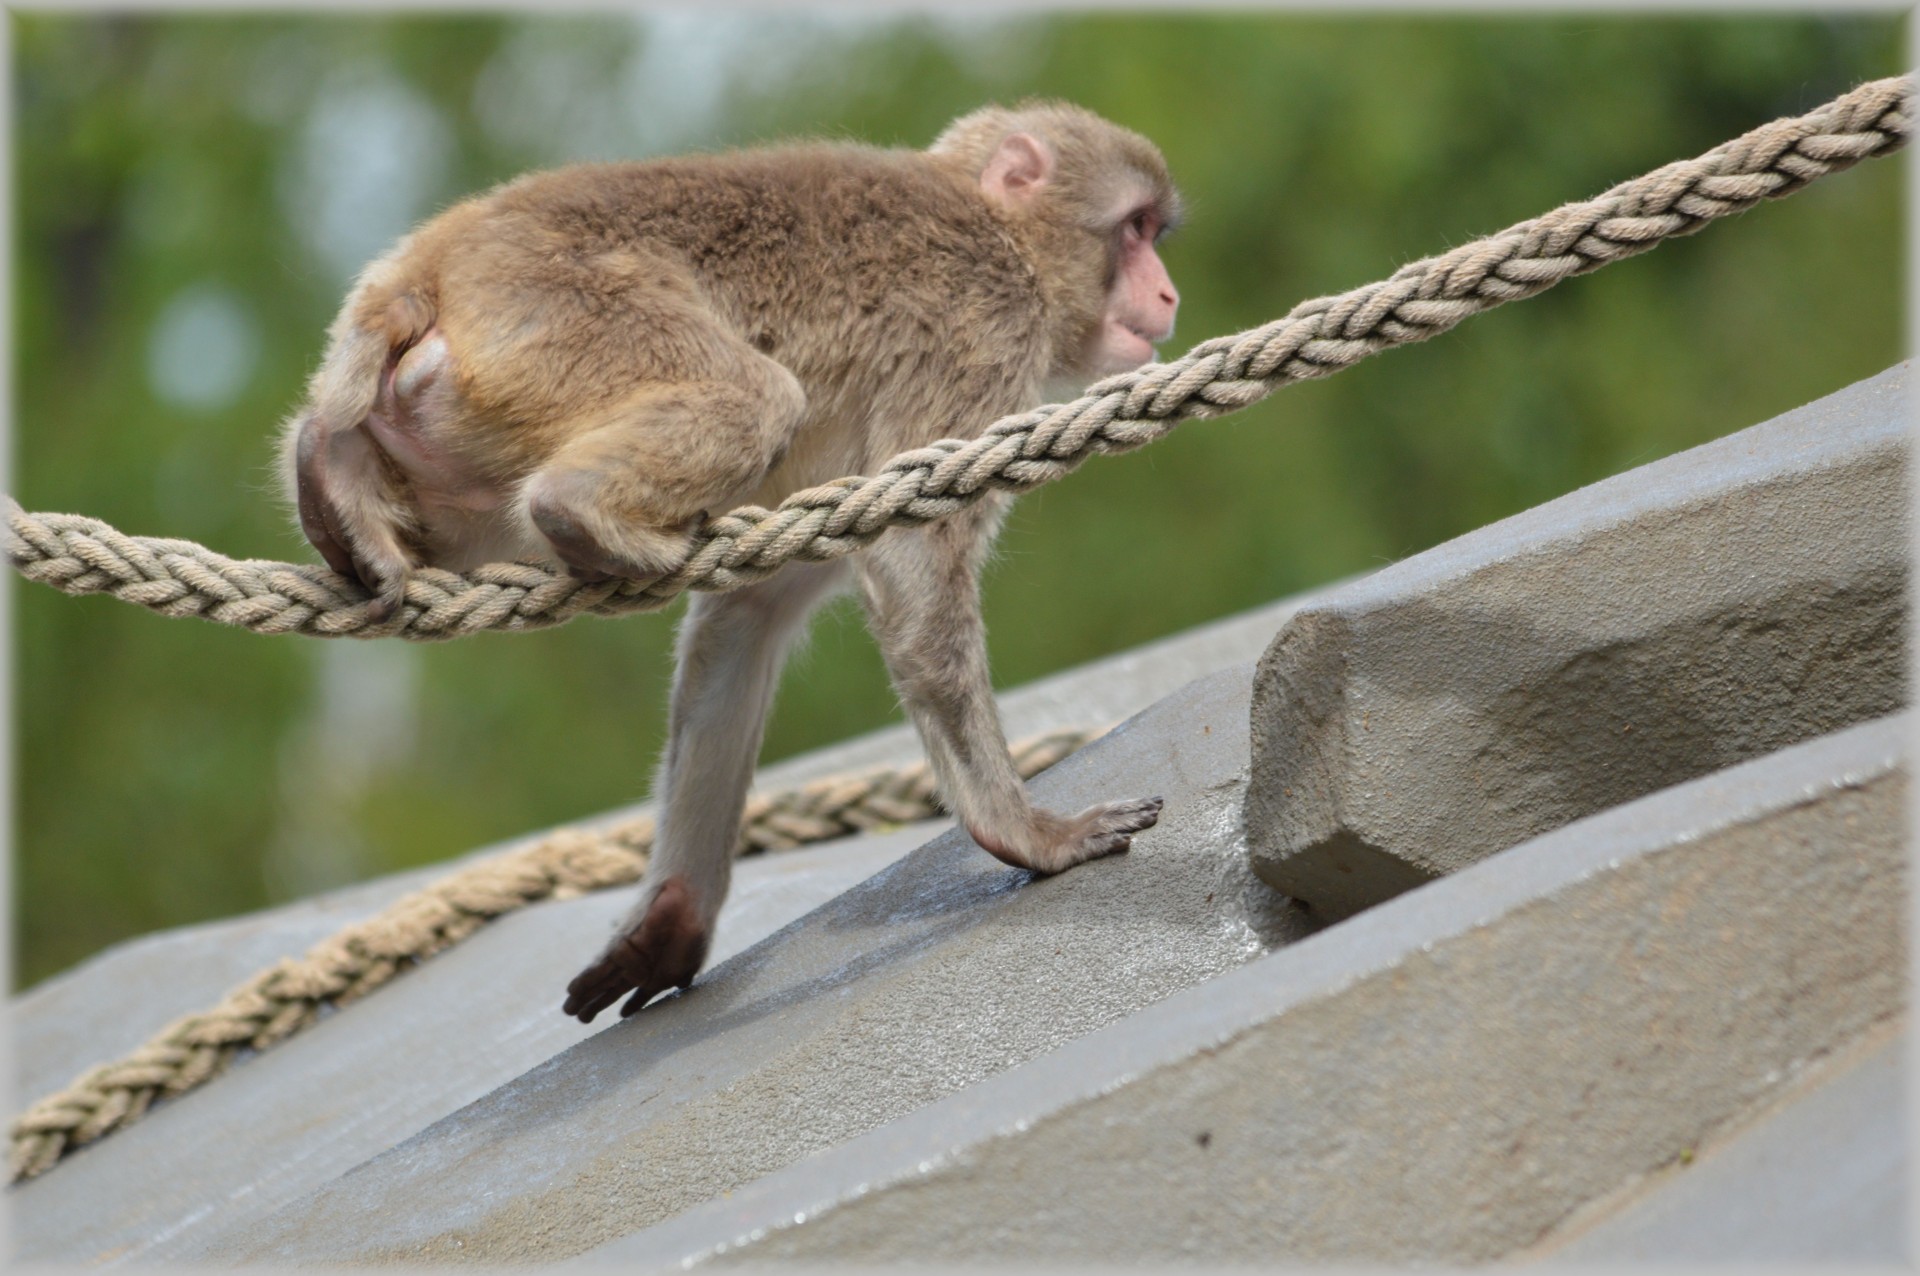 Monkey plays and hanging on rope